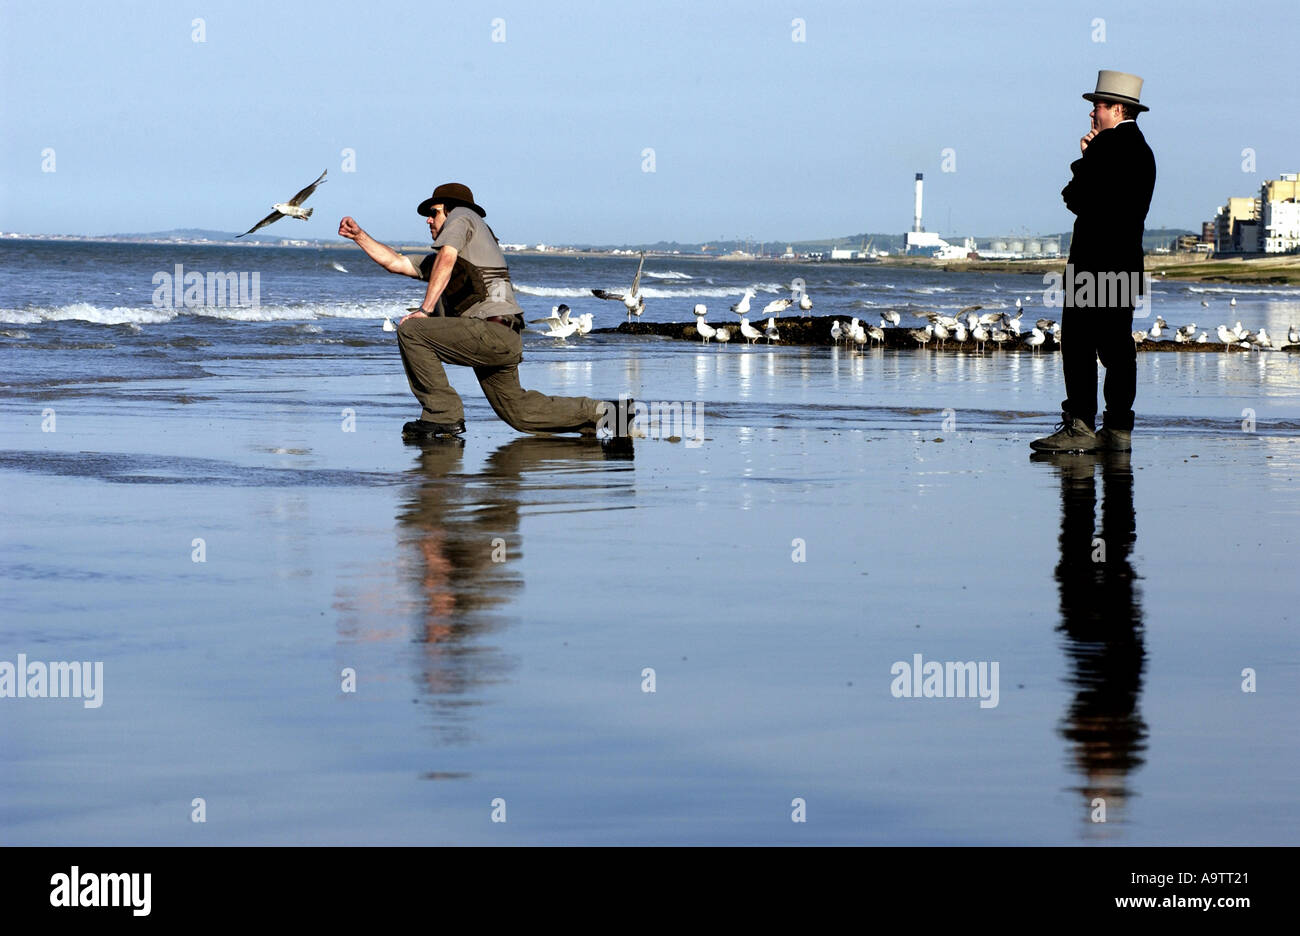 Stone skimming competition on Brighton Beach. A contender lobs a stone, watched by a judge. Stock Photo